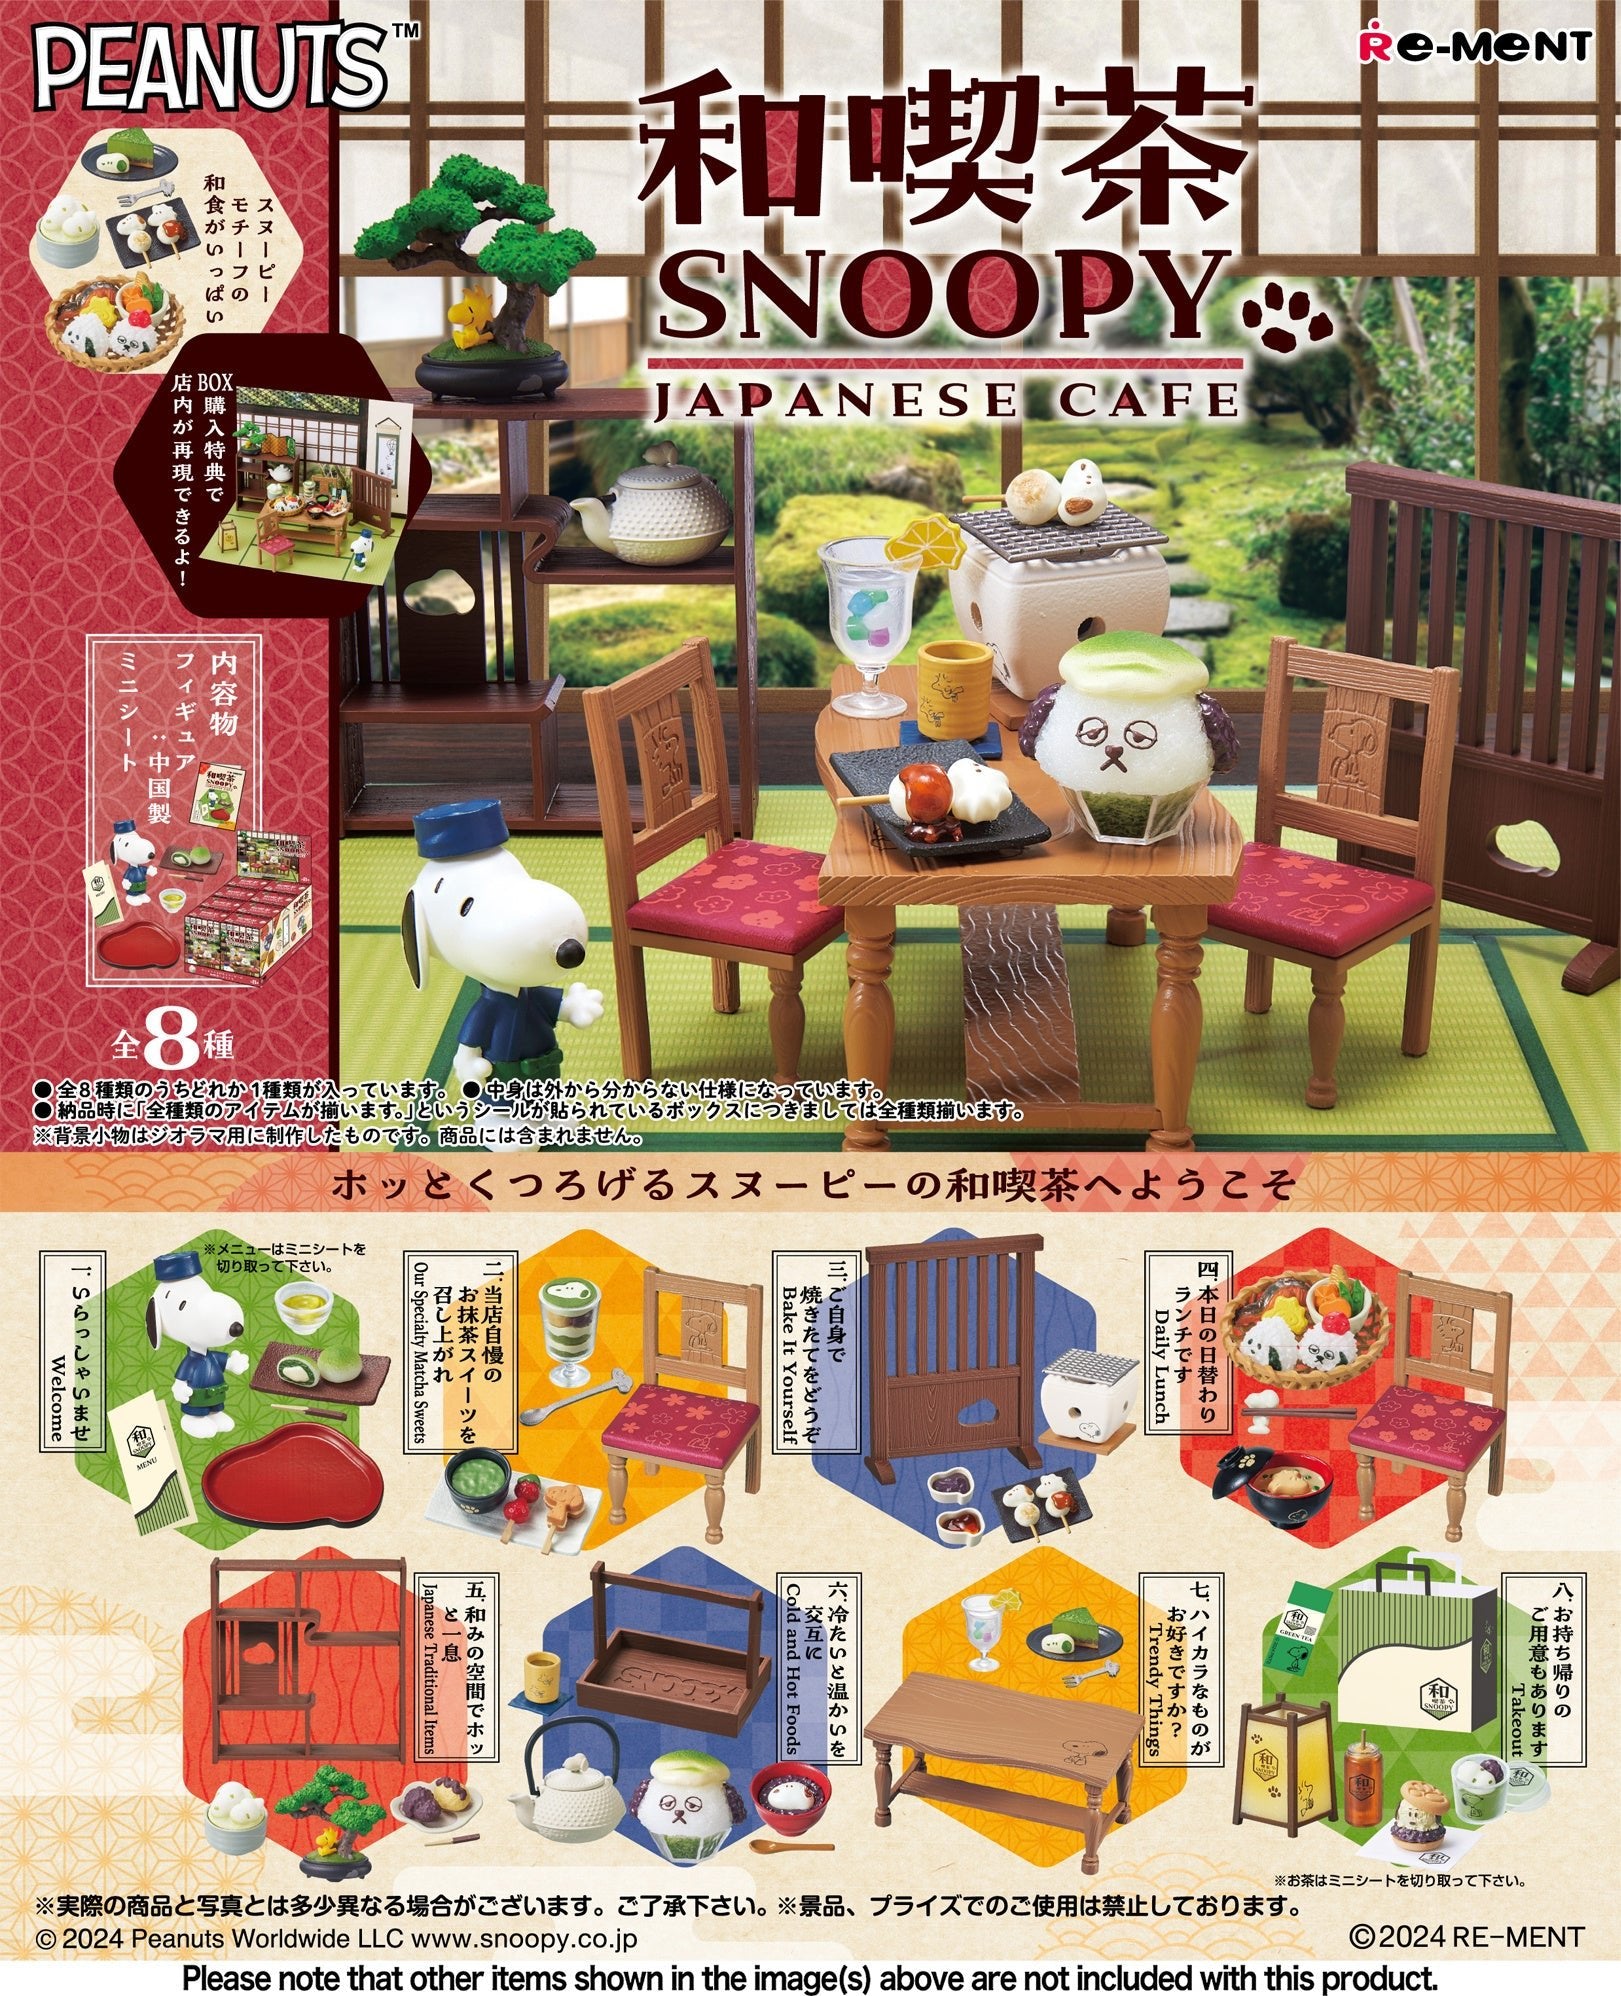 Re - Ment - Japanese Cafe Snoopy: 1 Random Pull - Good Game Anime